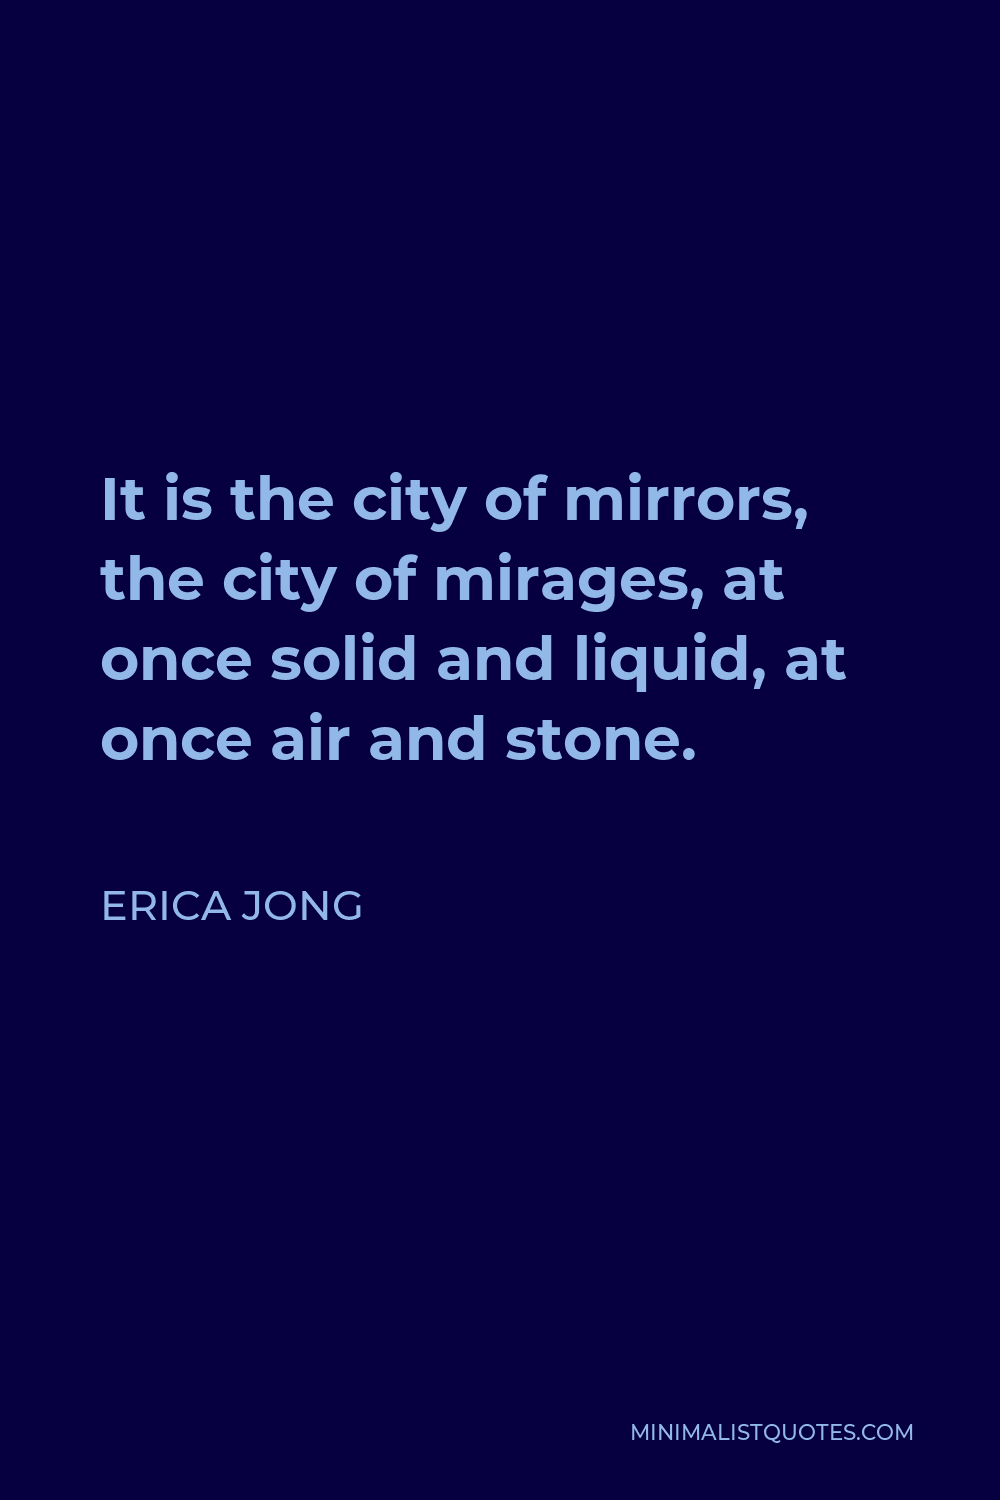 Erica Jong Quote - It is the city of mirrors, the city of mirages, at once solid and liquid, at once air and stone.